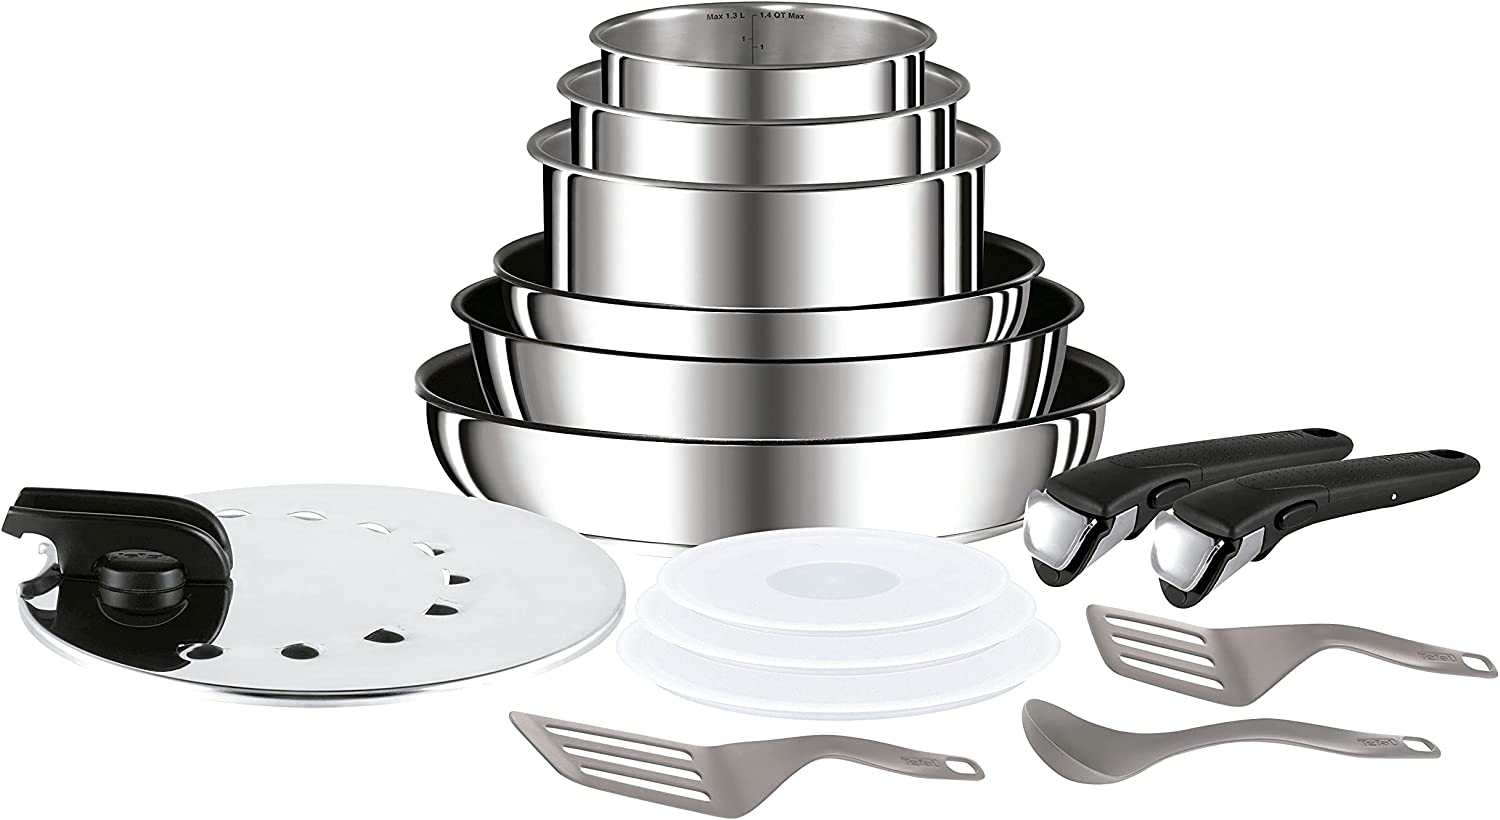 Tefal L94096 Ingenio Preference pans, stainless steel